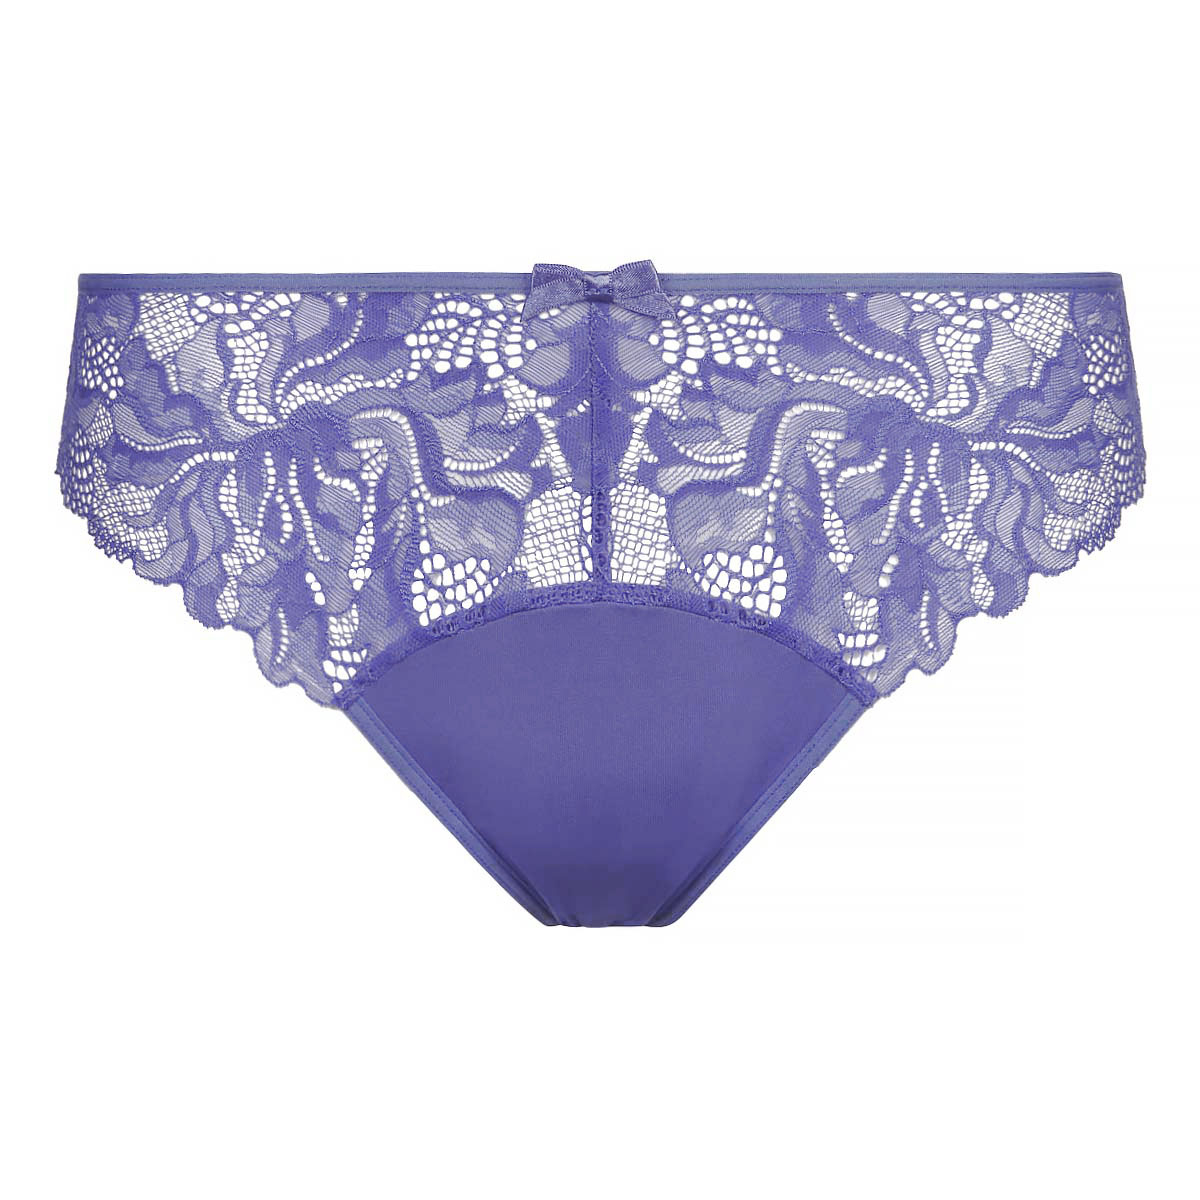 A-One Dolce 04 Sheer Violet Lace Embroidered Open Crotch Panties 1